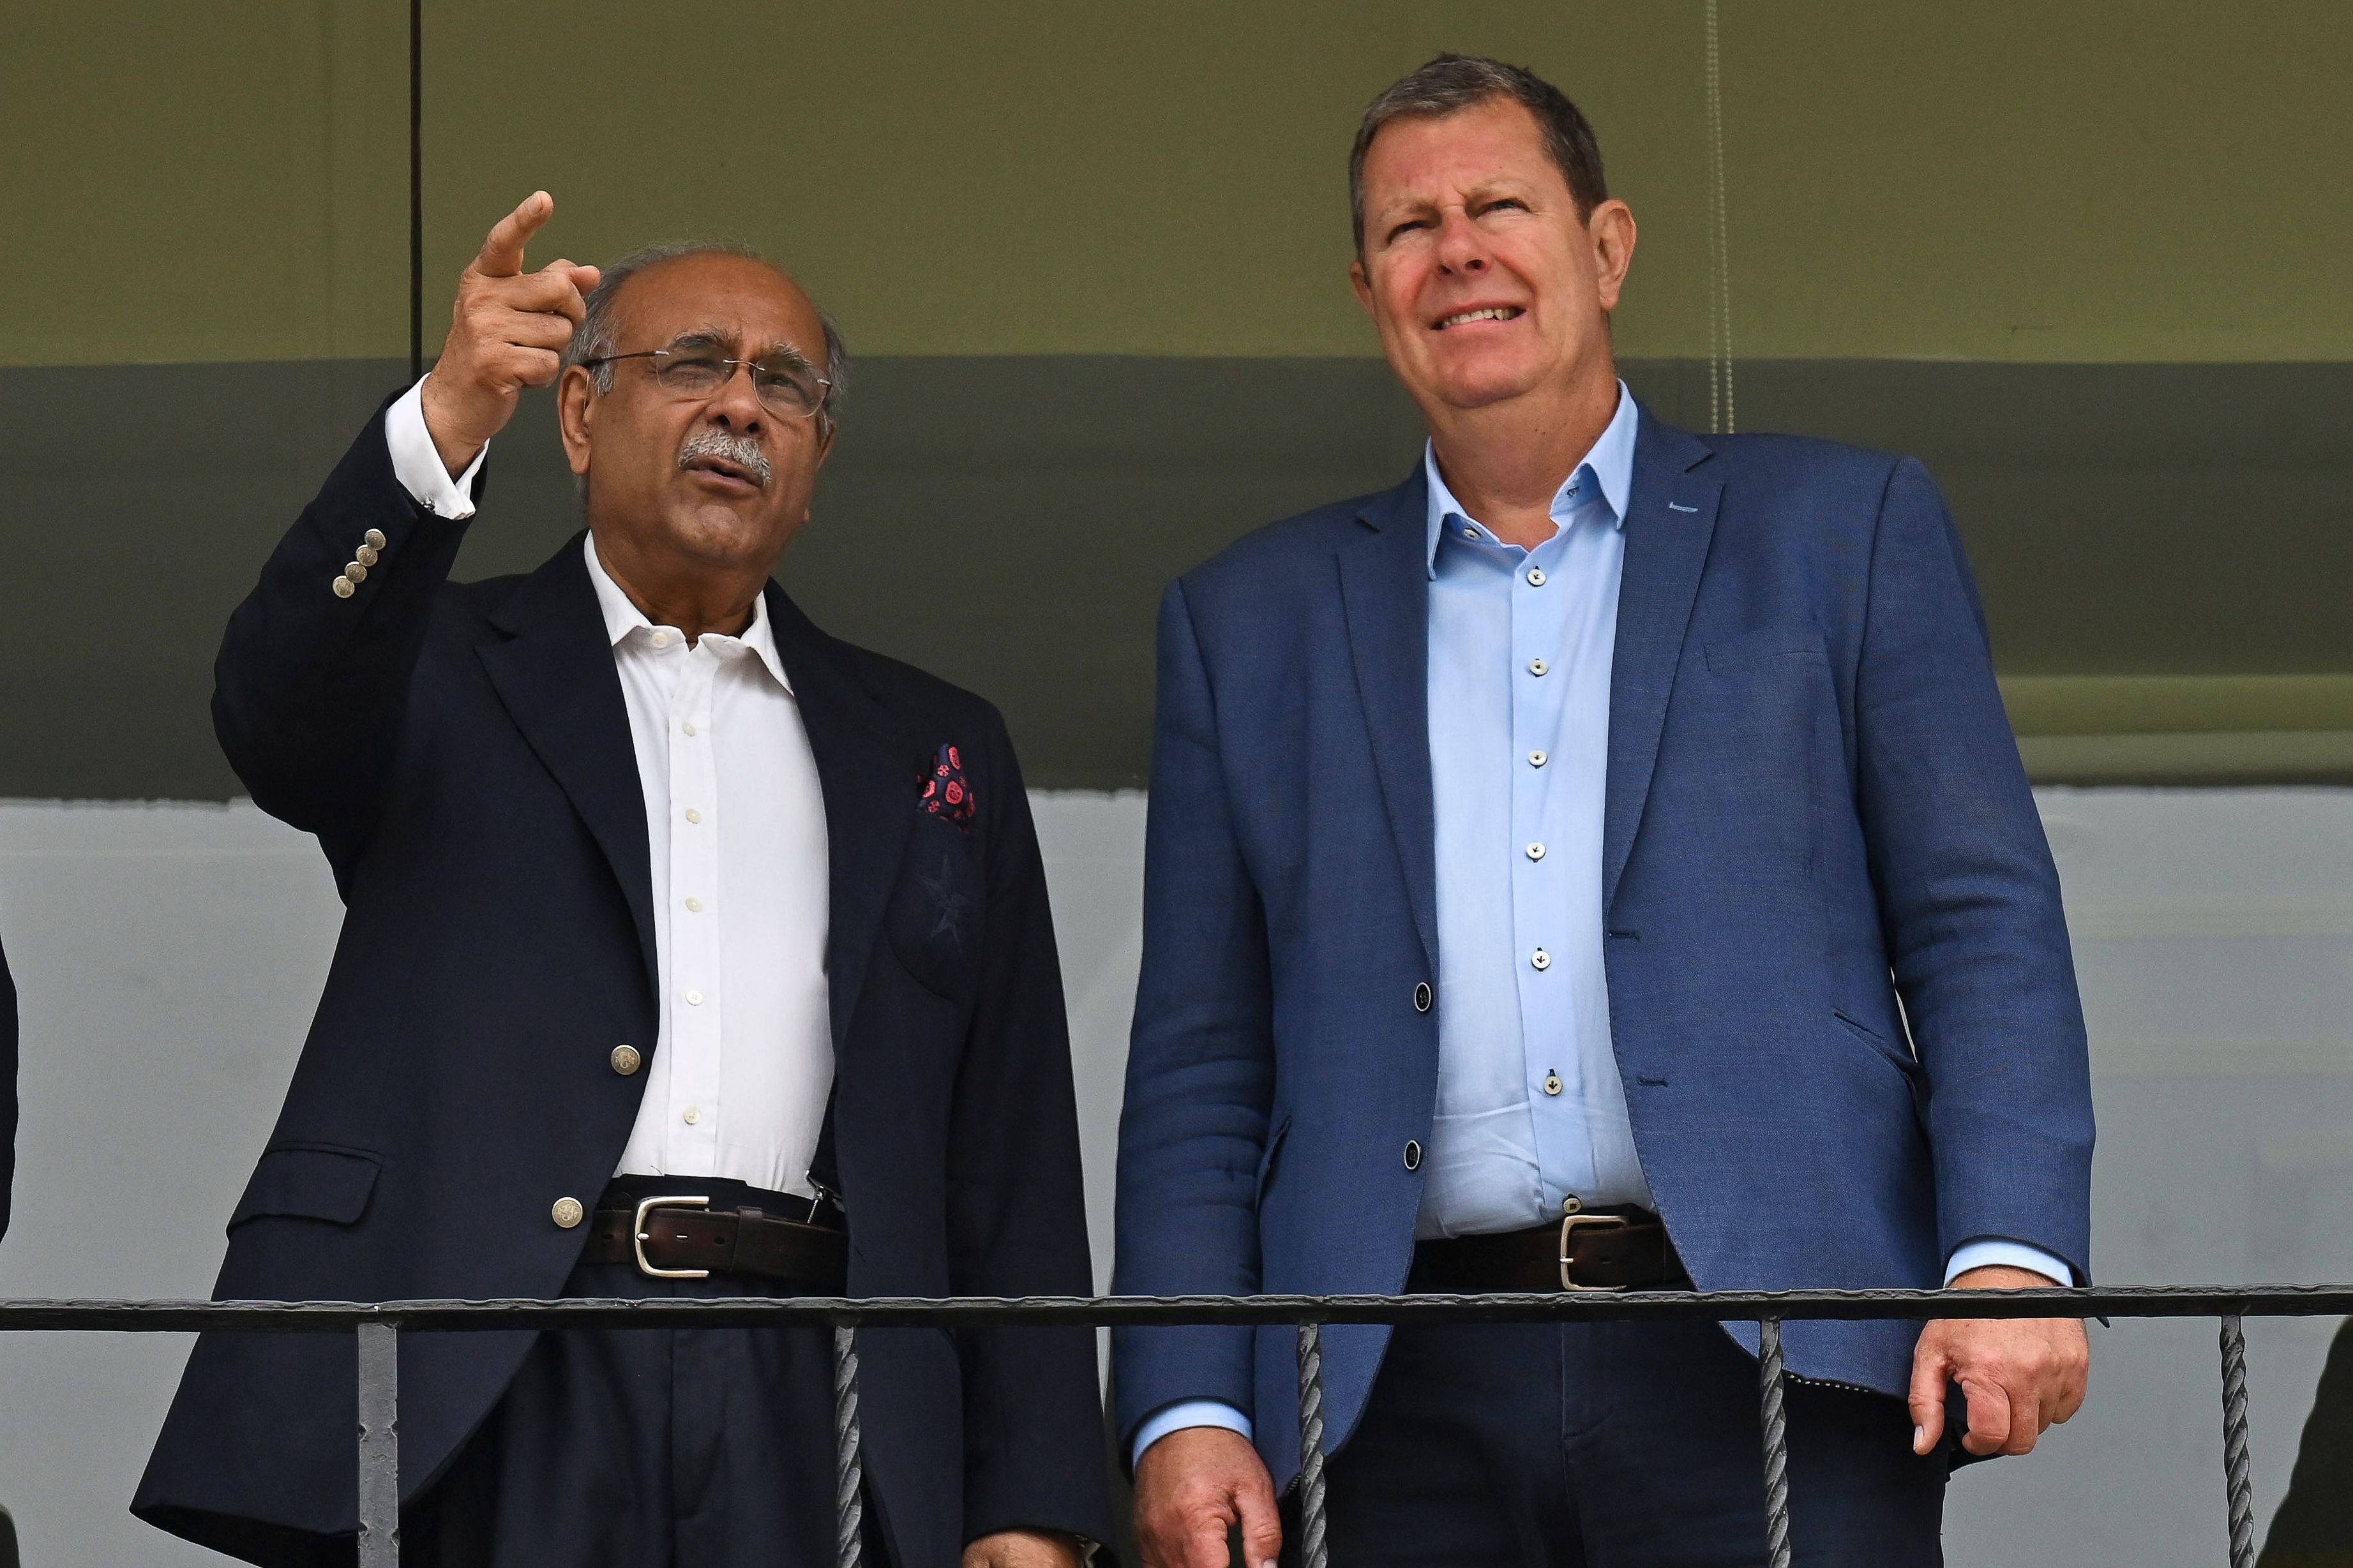 International Cricket Council (ICC) chairman Greg Barclay (right) visits the Gaddafi Stadium in Lahore along with Pakistan Cricket Board chairman Najam Sethi. Photo: AFP